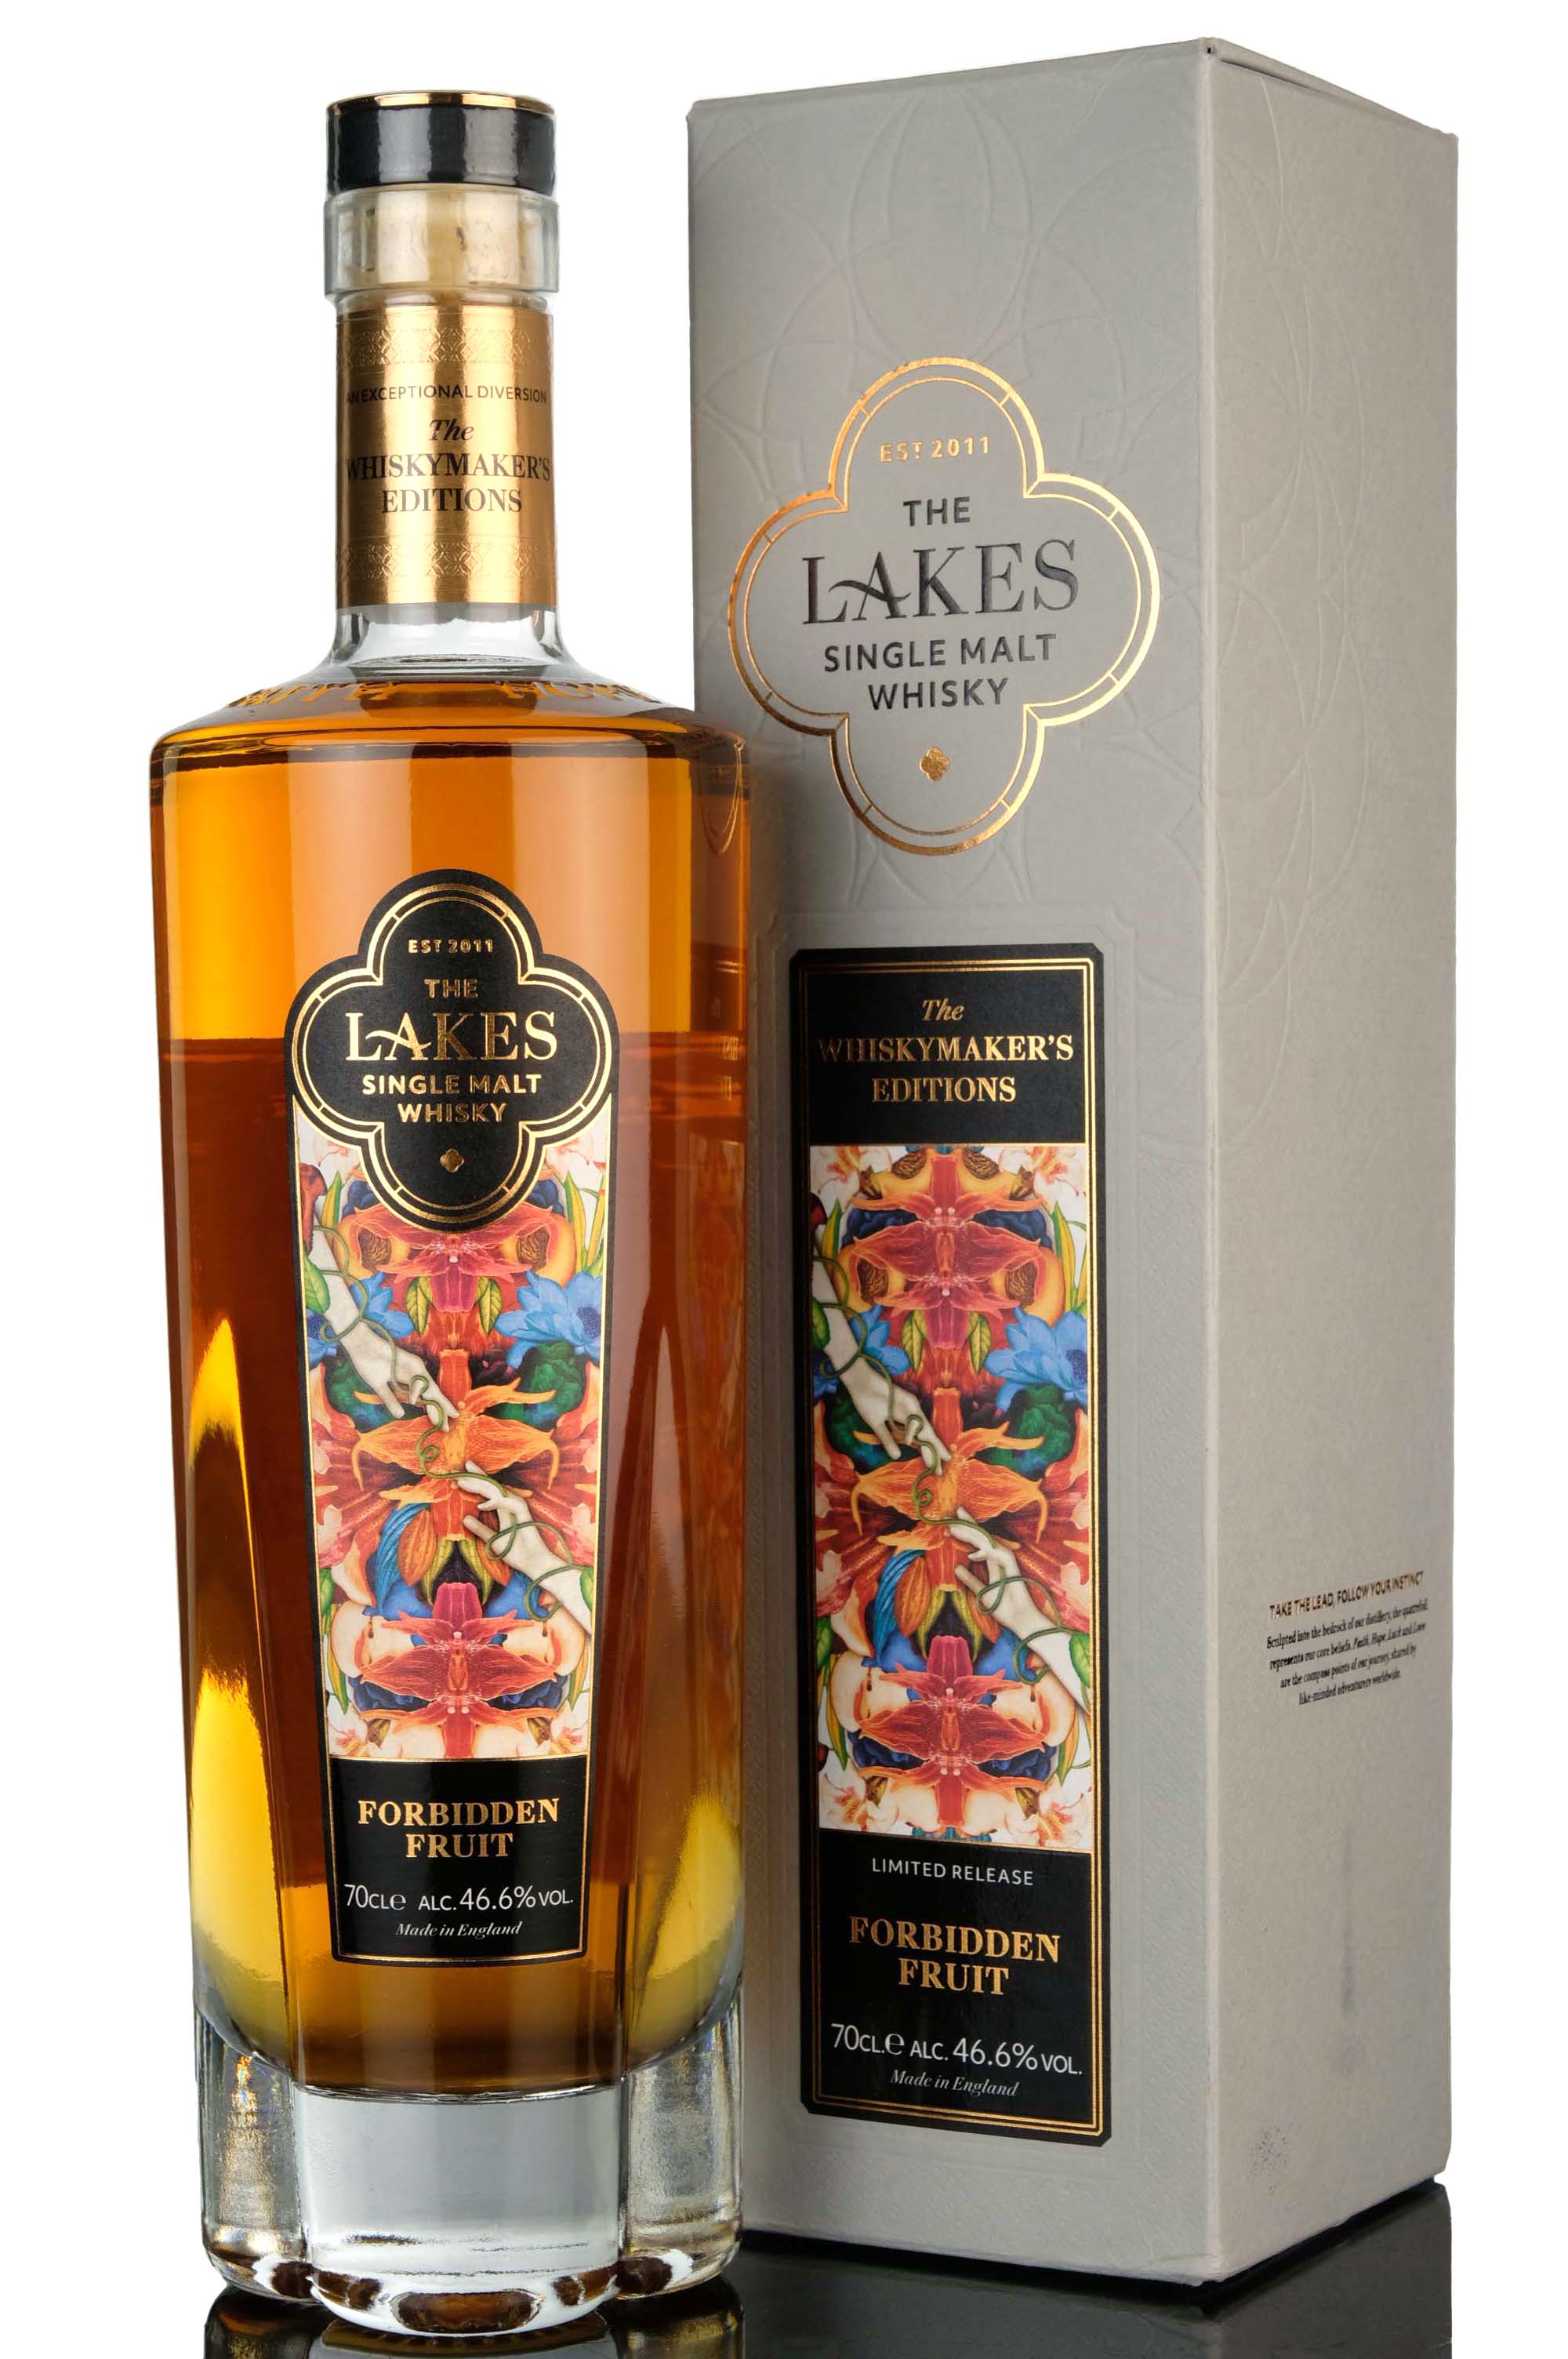 The Lakes Distillery The Whiskymakers Editions Forbidden Fruit - 2022 Release